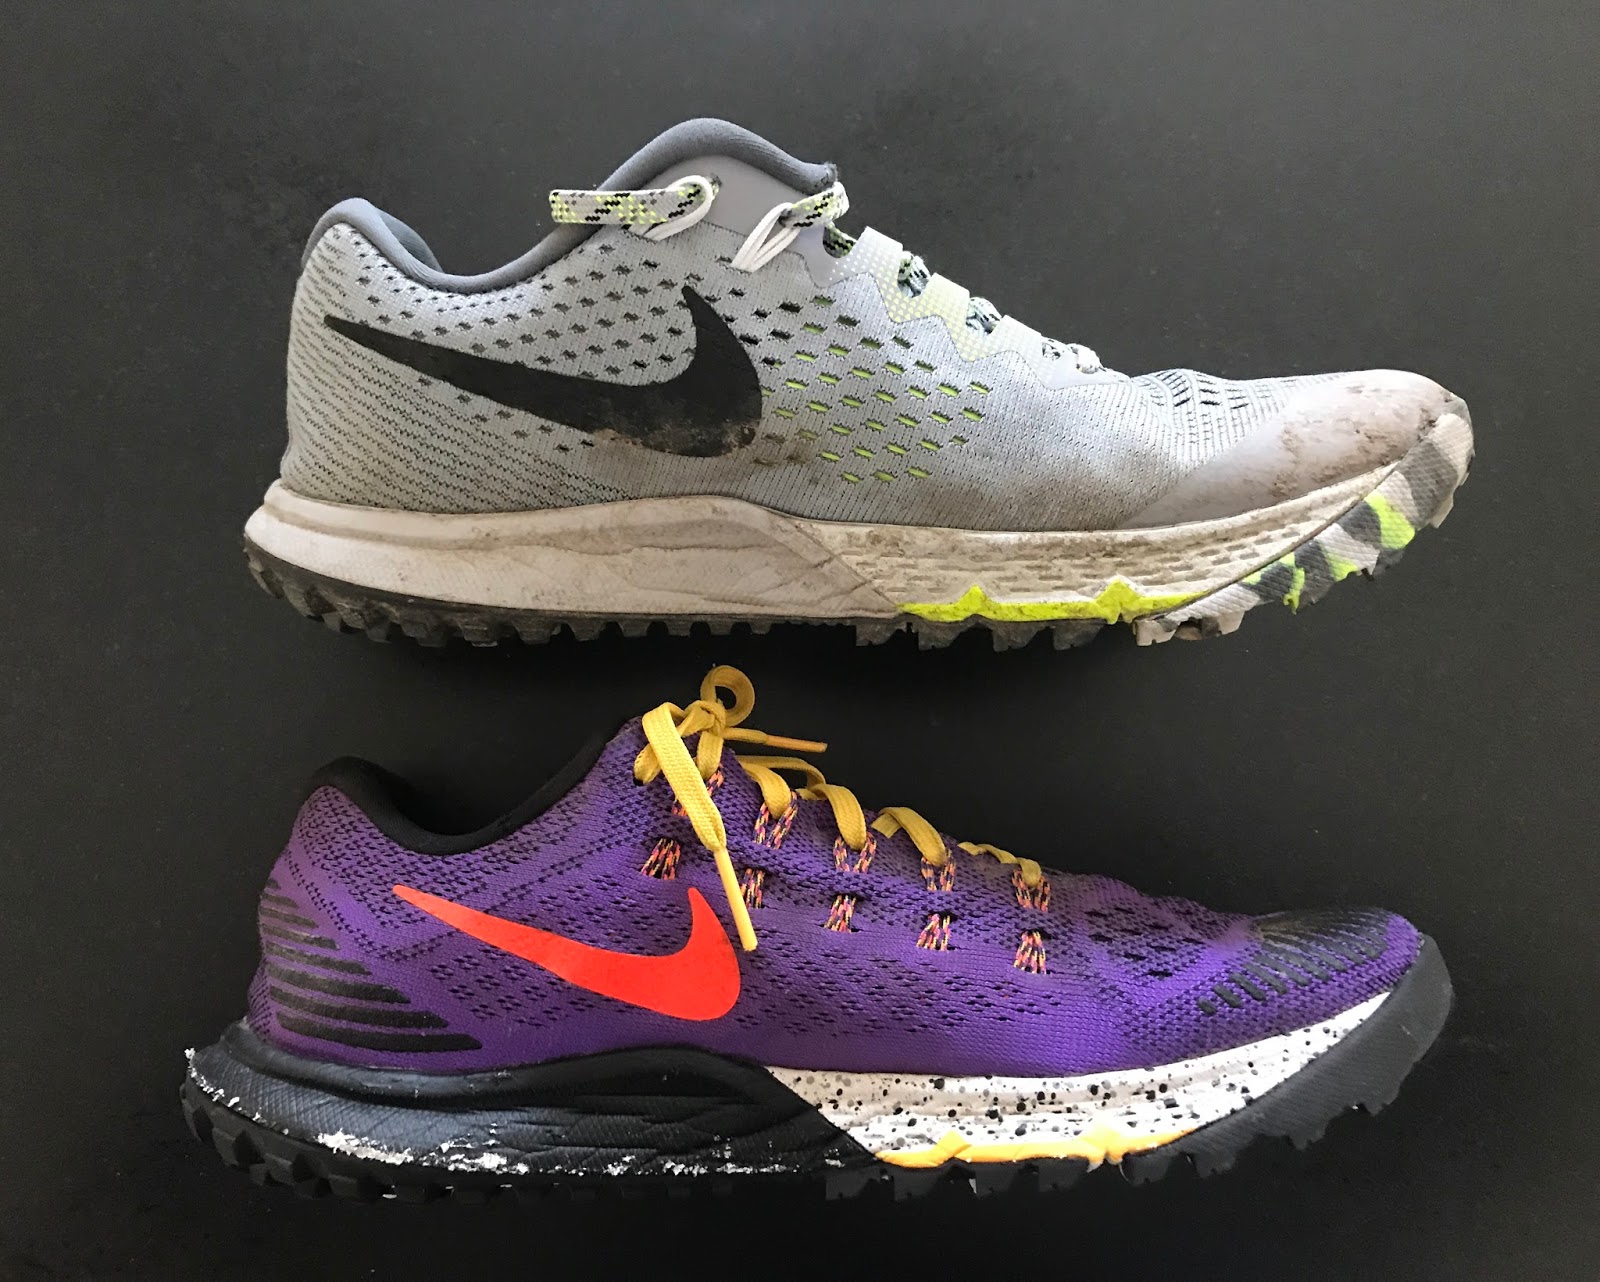 Road Trail Run: Nike Air Zoom Terra 4 Review-A Favorite Improves! Detailed Trail Feel Comparisons to Speedgoat 2, Salomon and Sense Ride